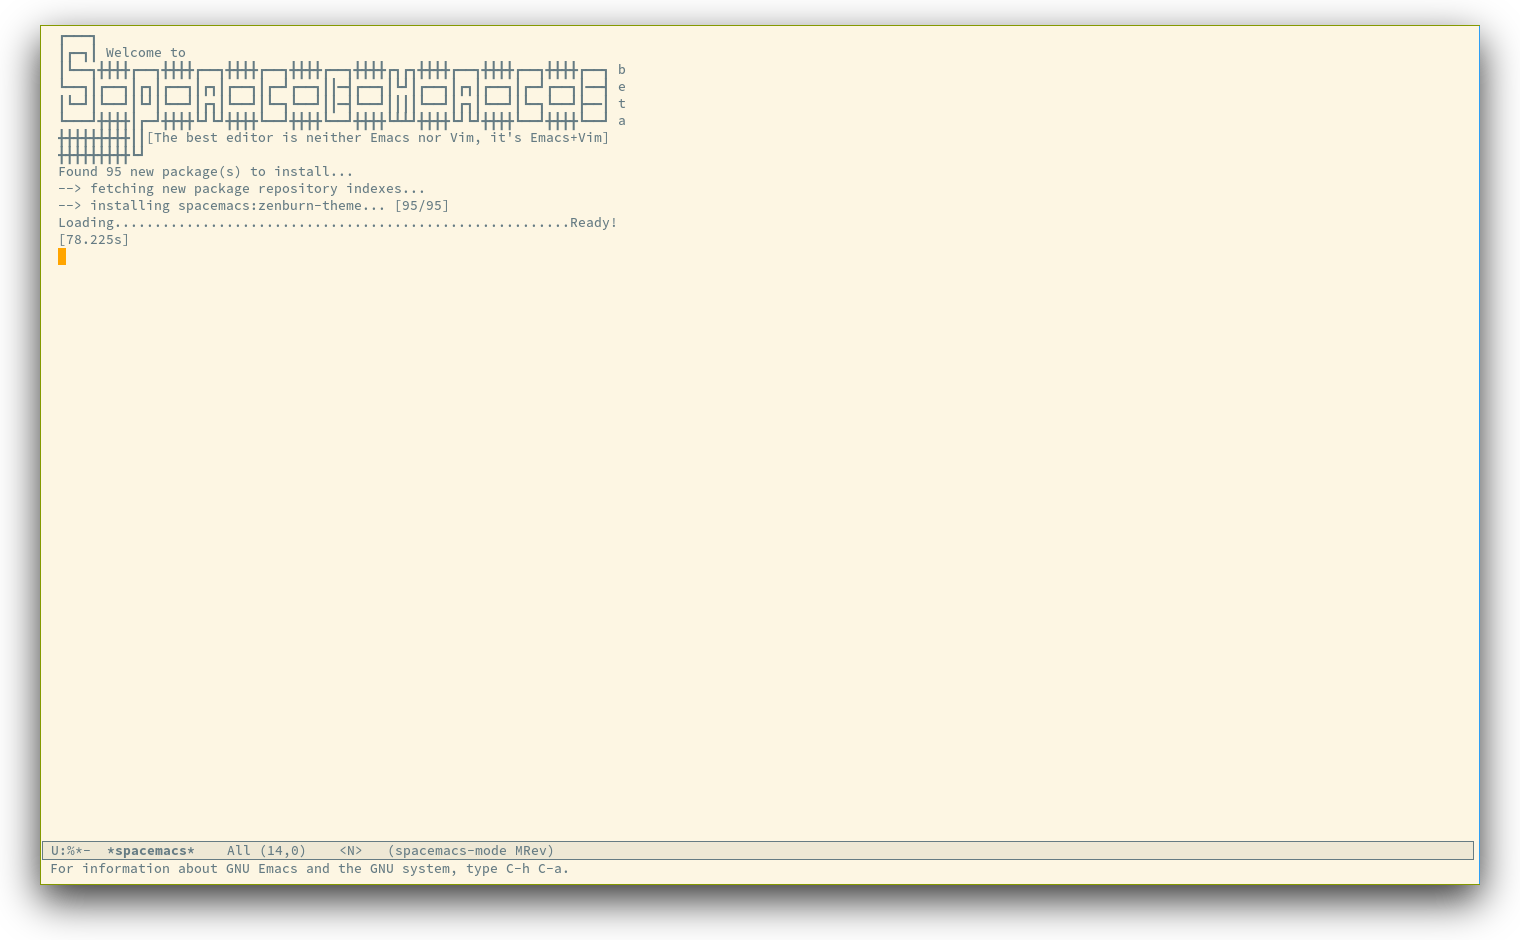 /TakeV/spacemacs/media/commit/6a18cad5c0e4ba896921c4659bffd9500d8d93b8/doc/img/spacemacs-startup.png